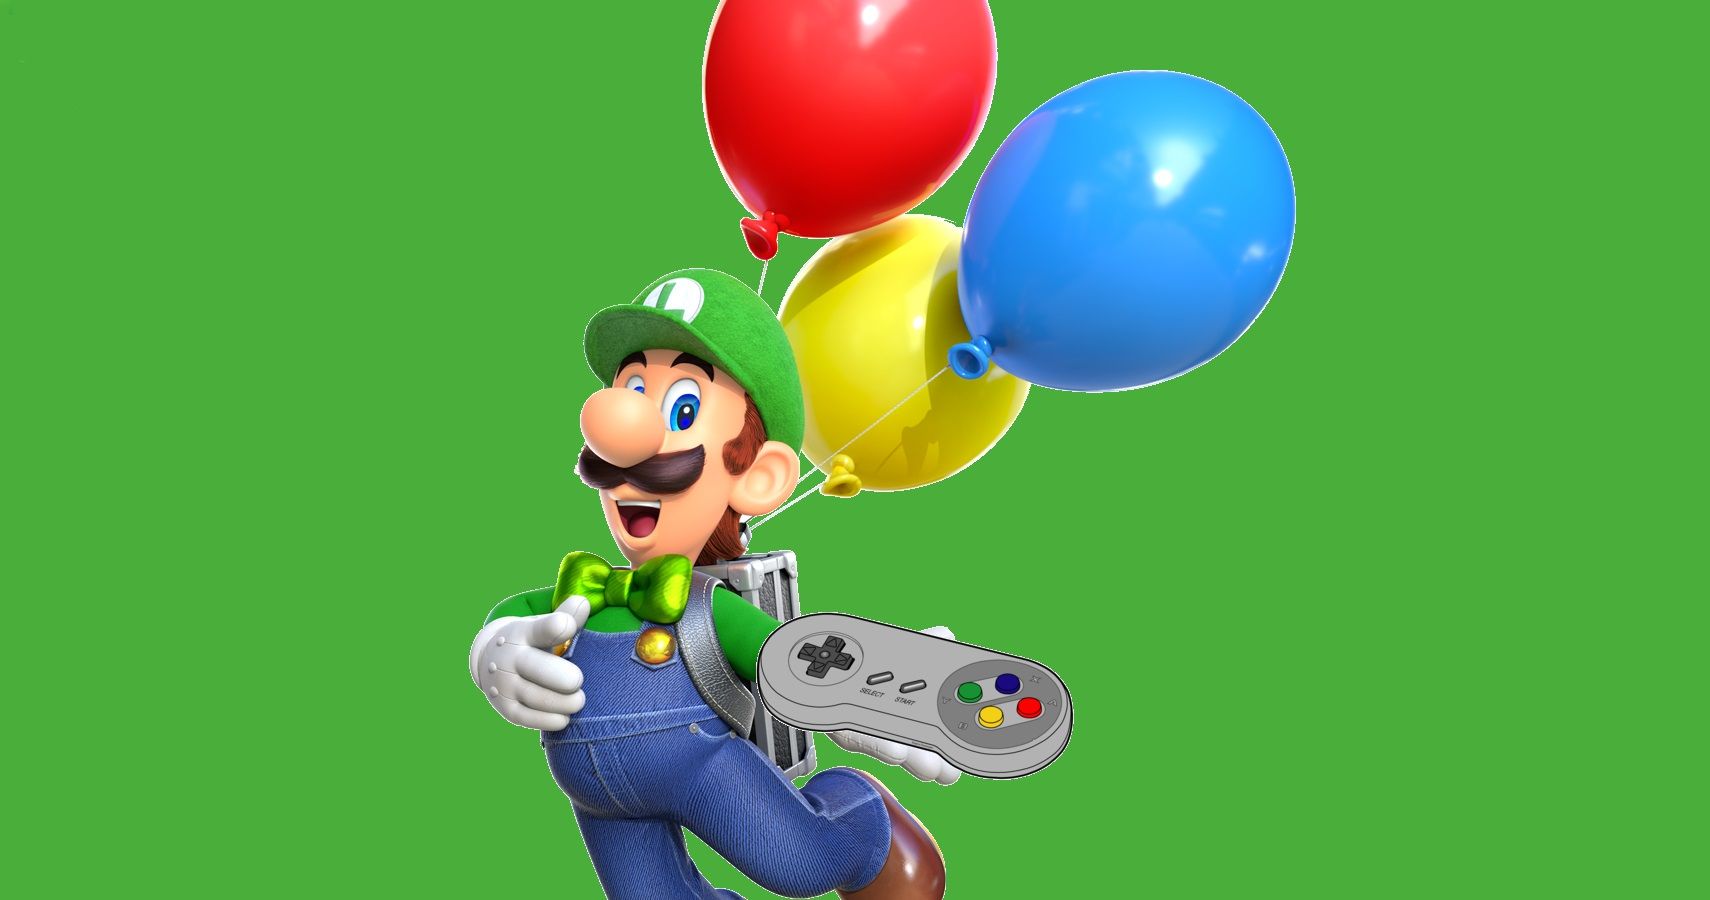 Gaming Detail In Super Mario Odysseys Balloon Hunt DLC Luigis Balloons Match The SNES Controllers Color Scheme